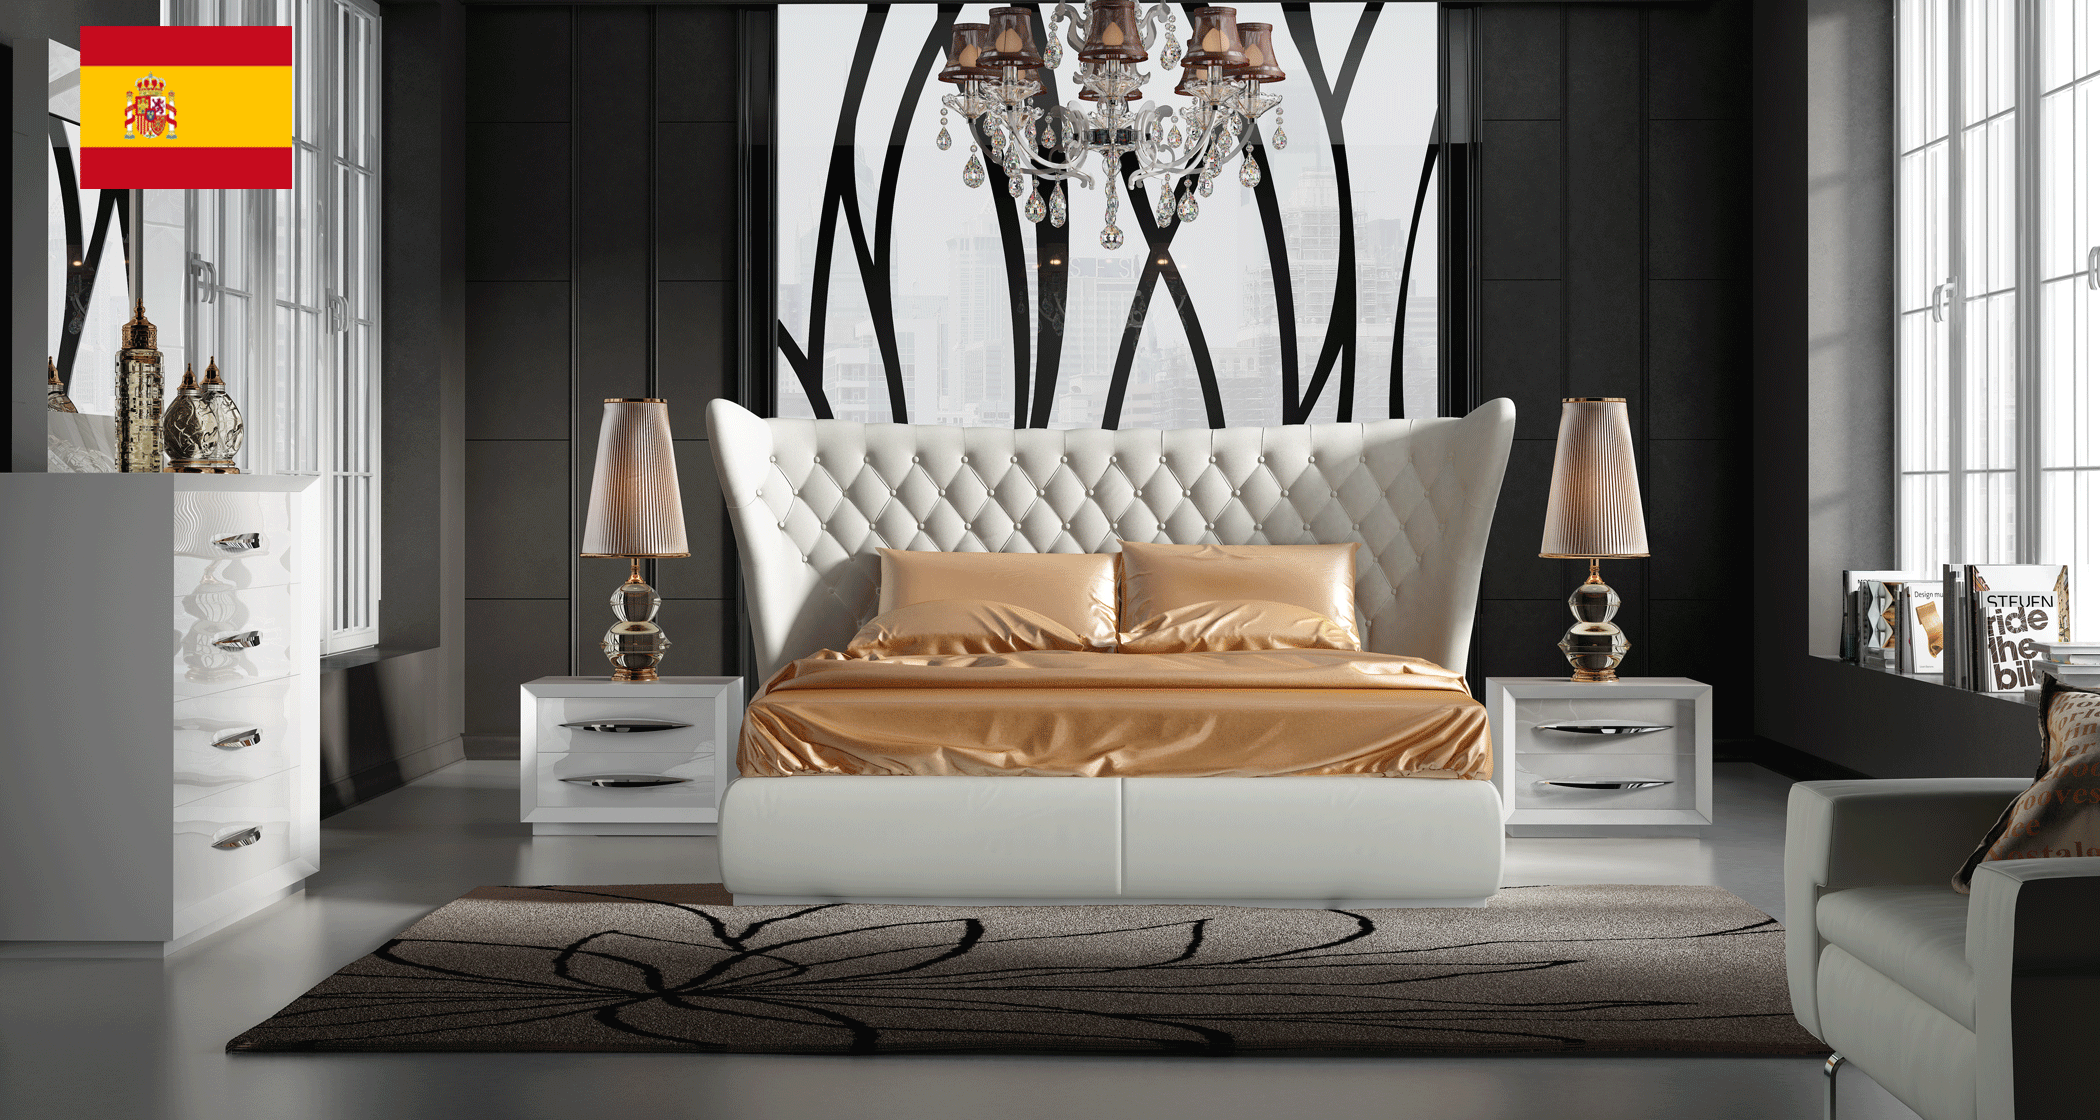 Bedroom Furniture Dressers and Chests Miami Bedroom